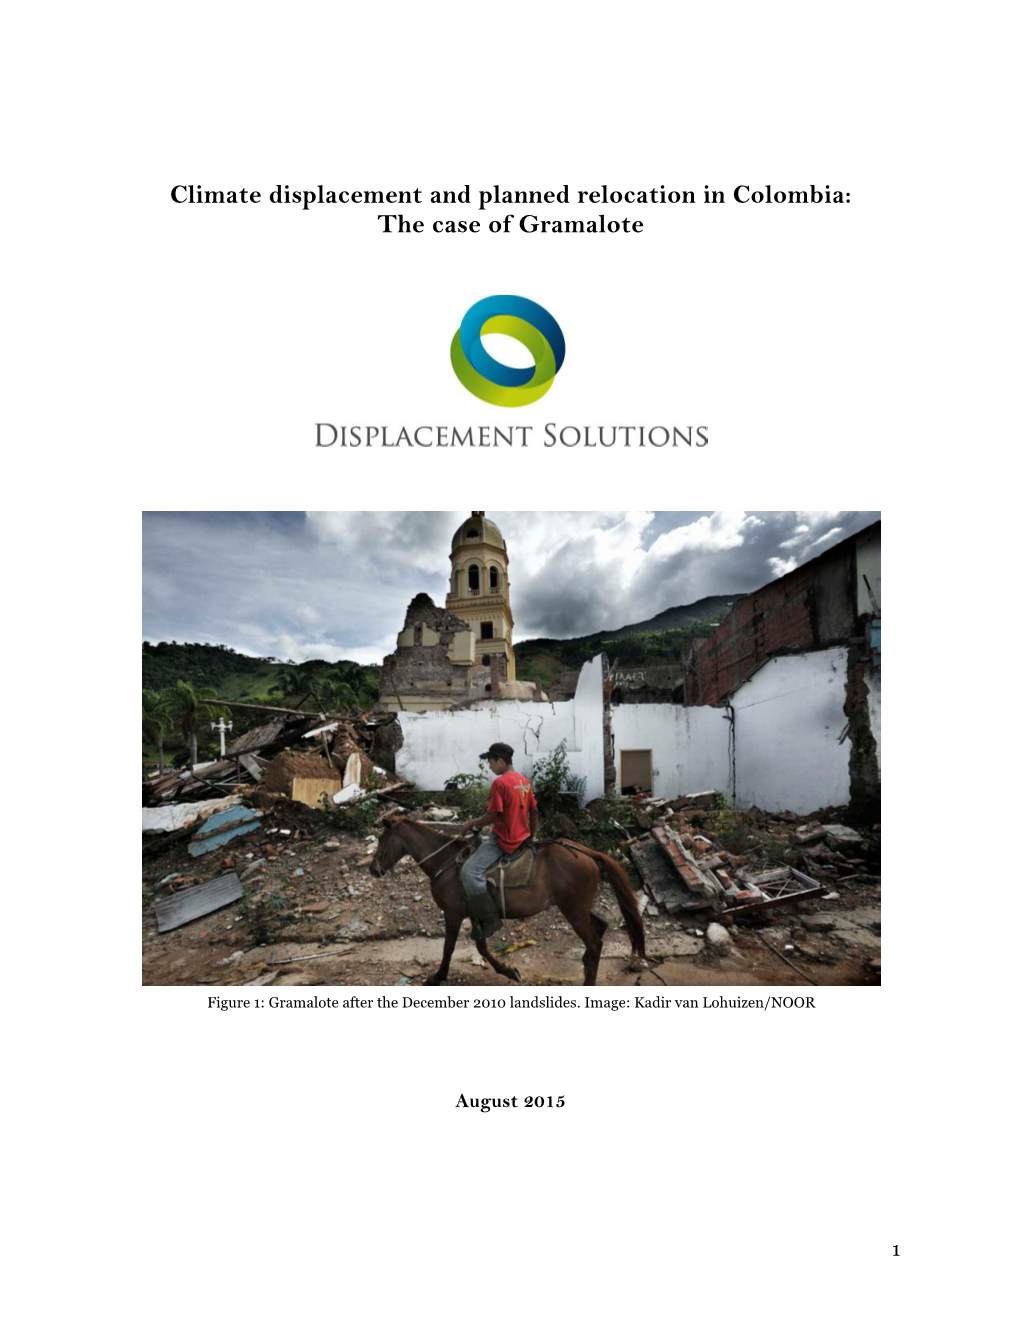 Climate Displacement and Planned Relocation in Colombia: the Case of Gramalote